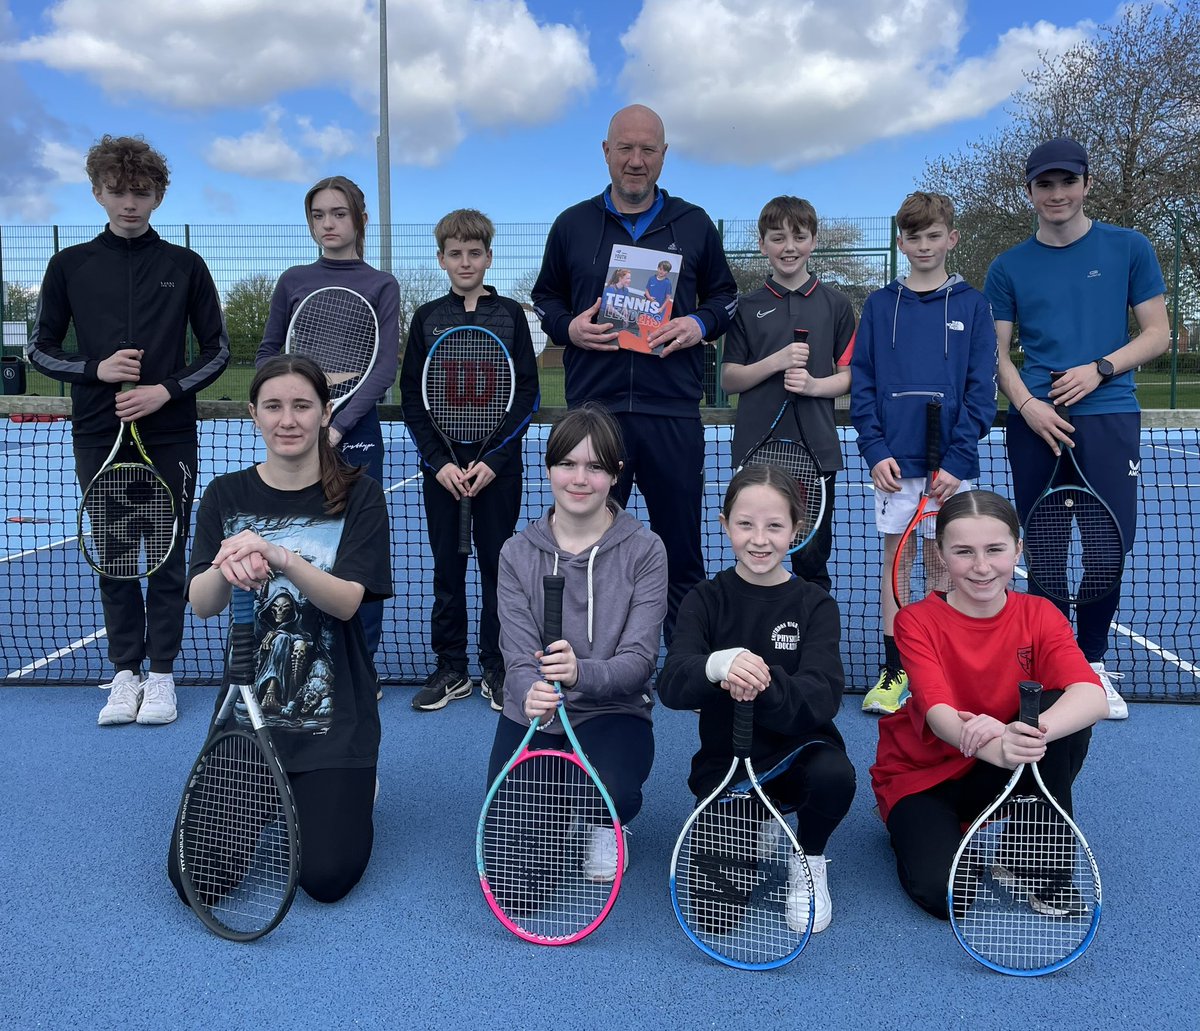 Well done to our newly qualified @the_LTA Tennis Leaders - we look forward to you supporting our SSP tournaments and festivals this Summer term. Thank you Stu for another great course 👏👏 @norfolktennis @NorfolkSchGames @YourSchoolGames @TheLynnNews @Lynnsport @YLPSport